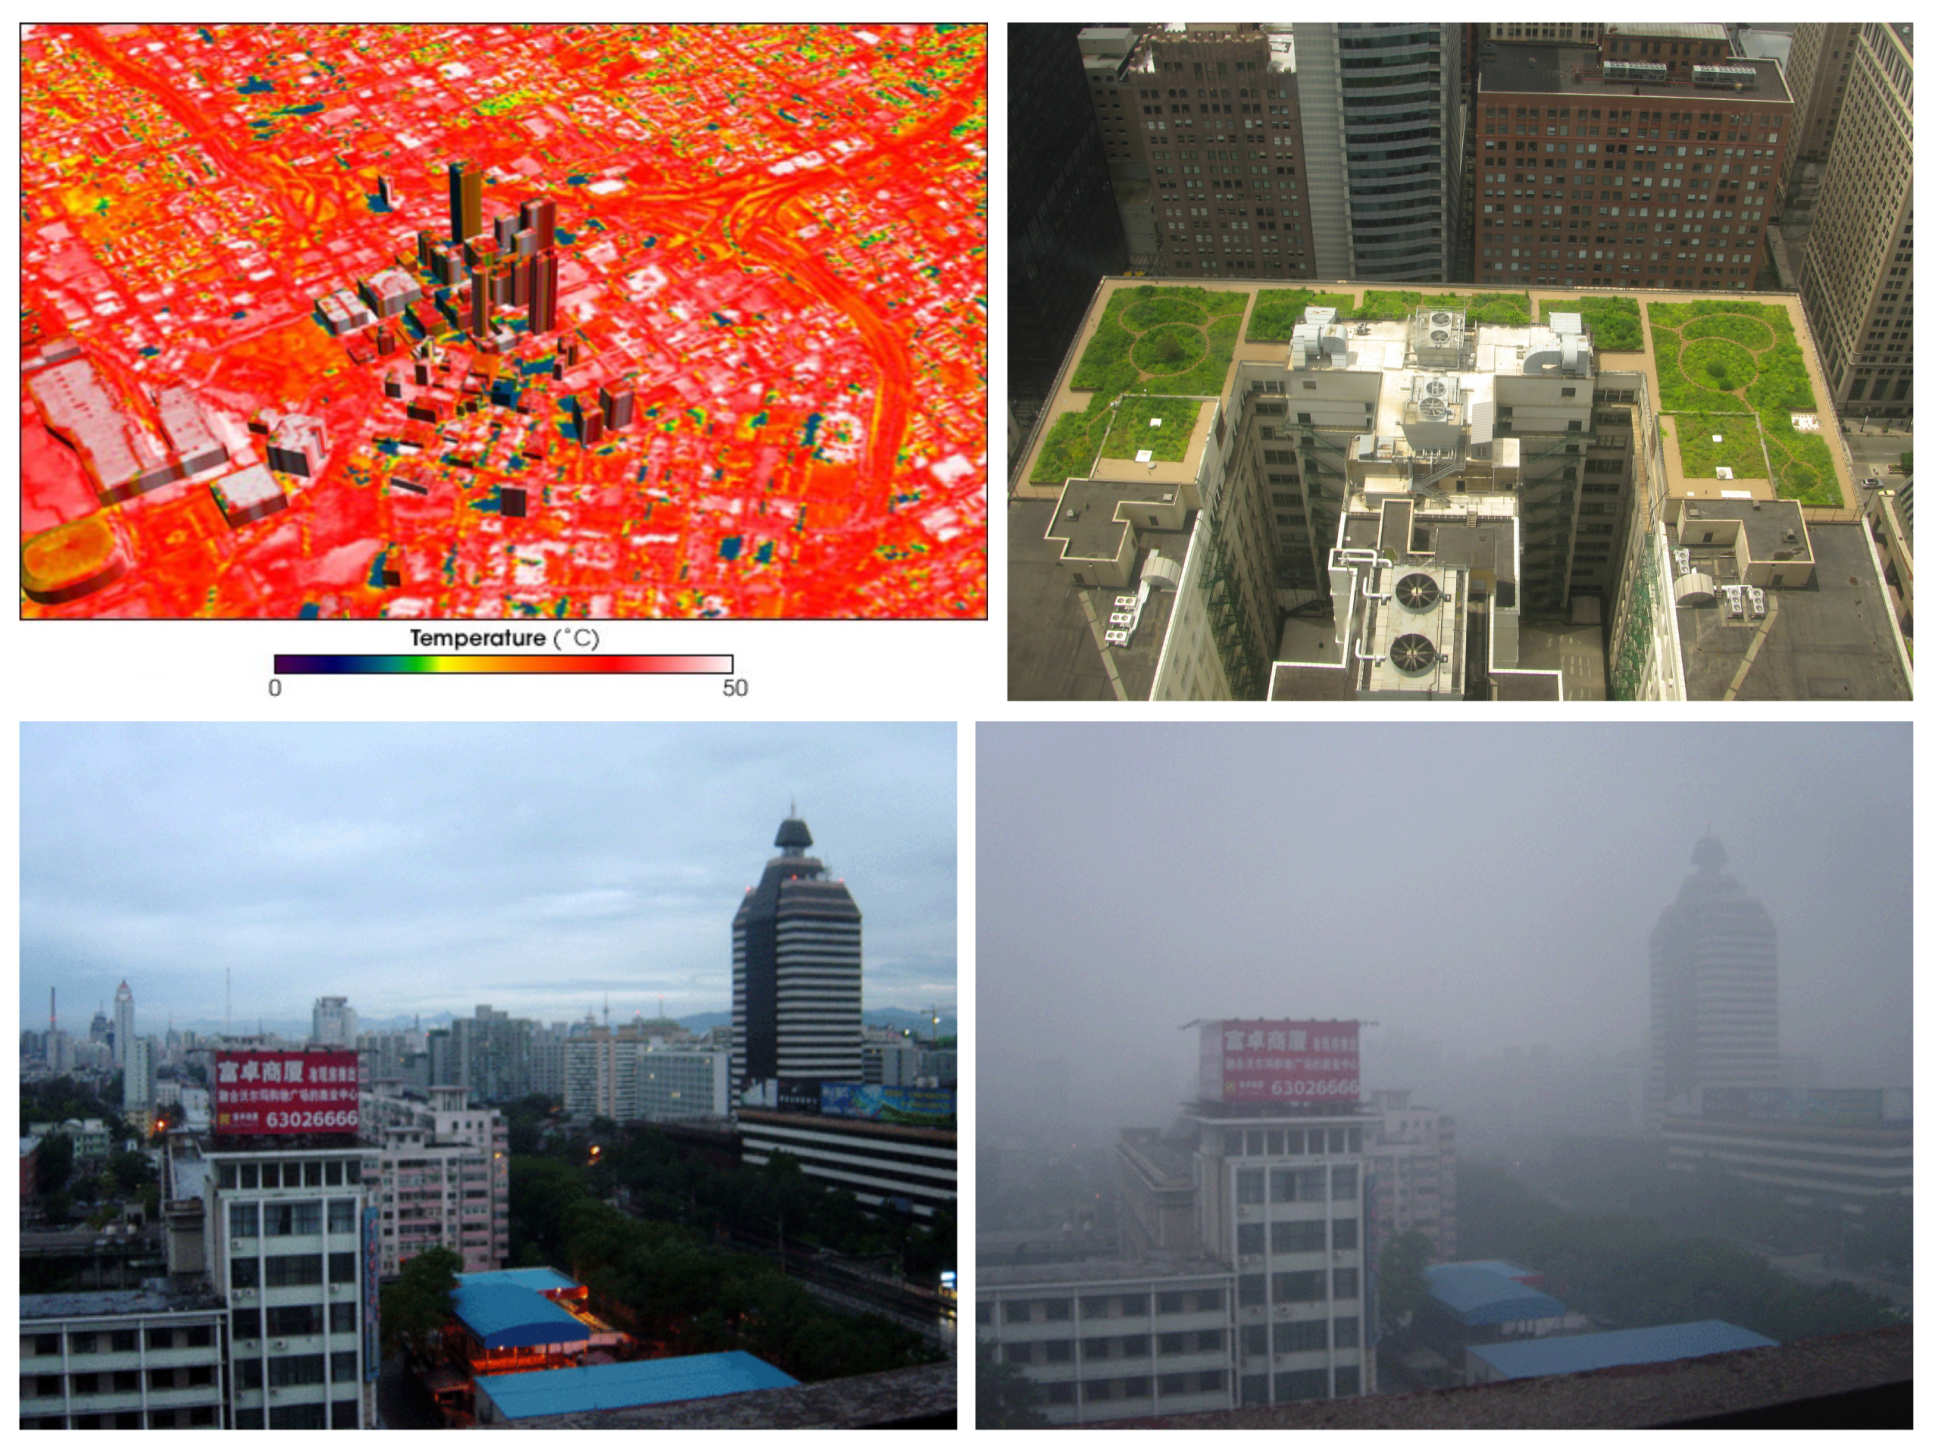 [Top-left] Urban heat island in Atlanta, USA, [Top-right] Green roof of city hall, Chicago, Illinois, USA, [Bottom] Beijing on a clear and smoggy day 